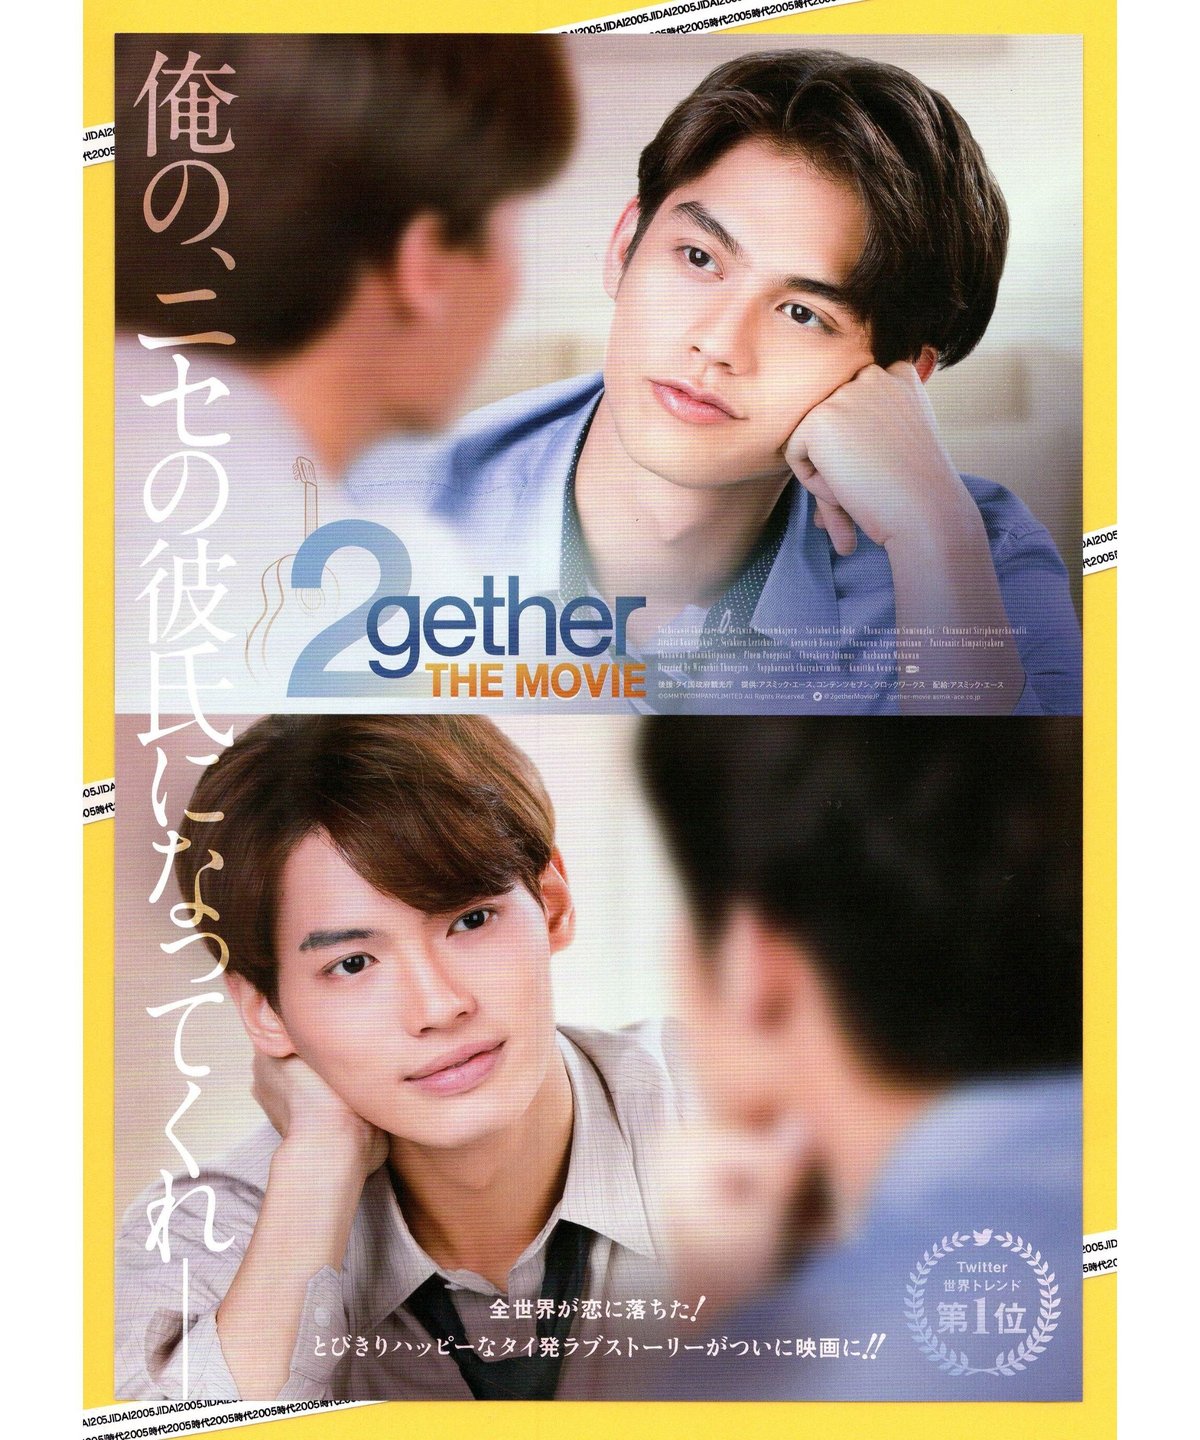 2gether THE MOVIE クリアファイルセット BOOK - アート